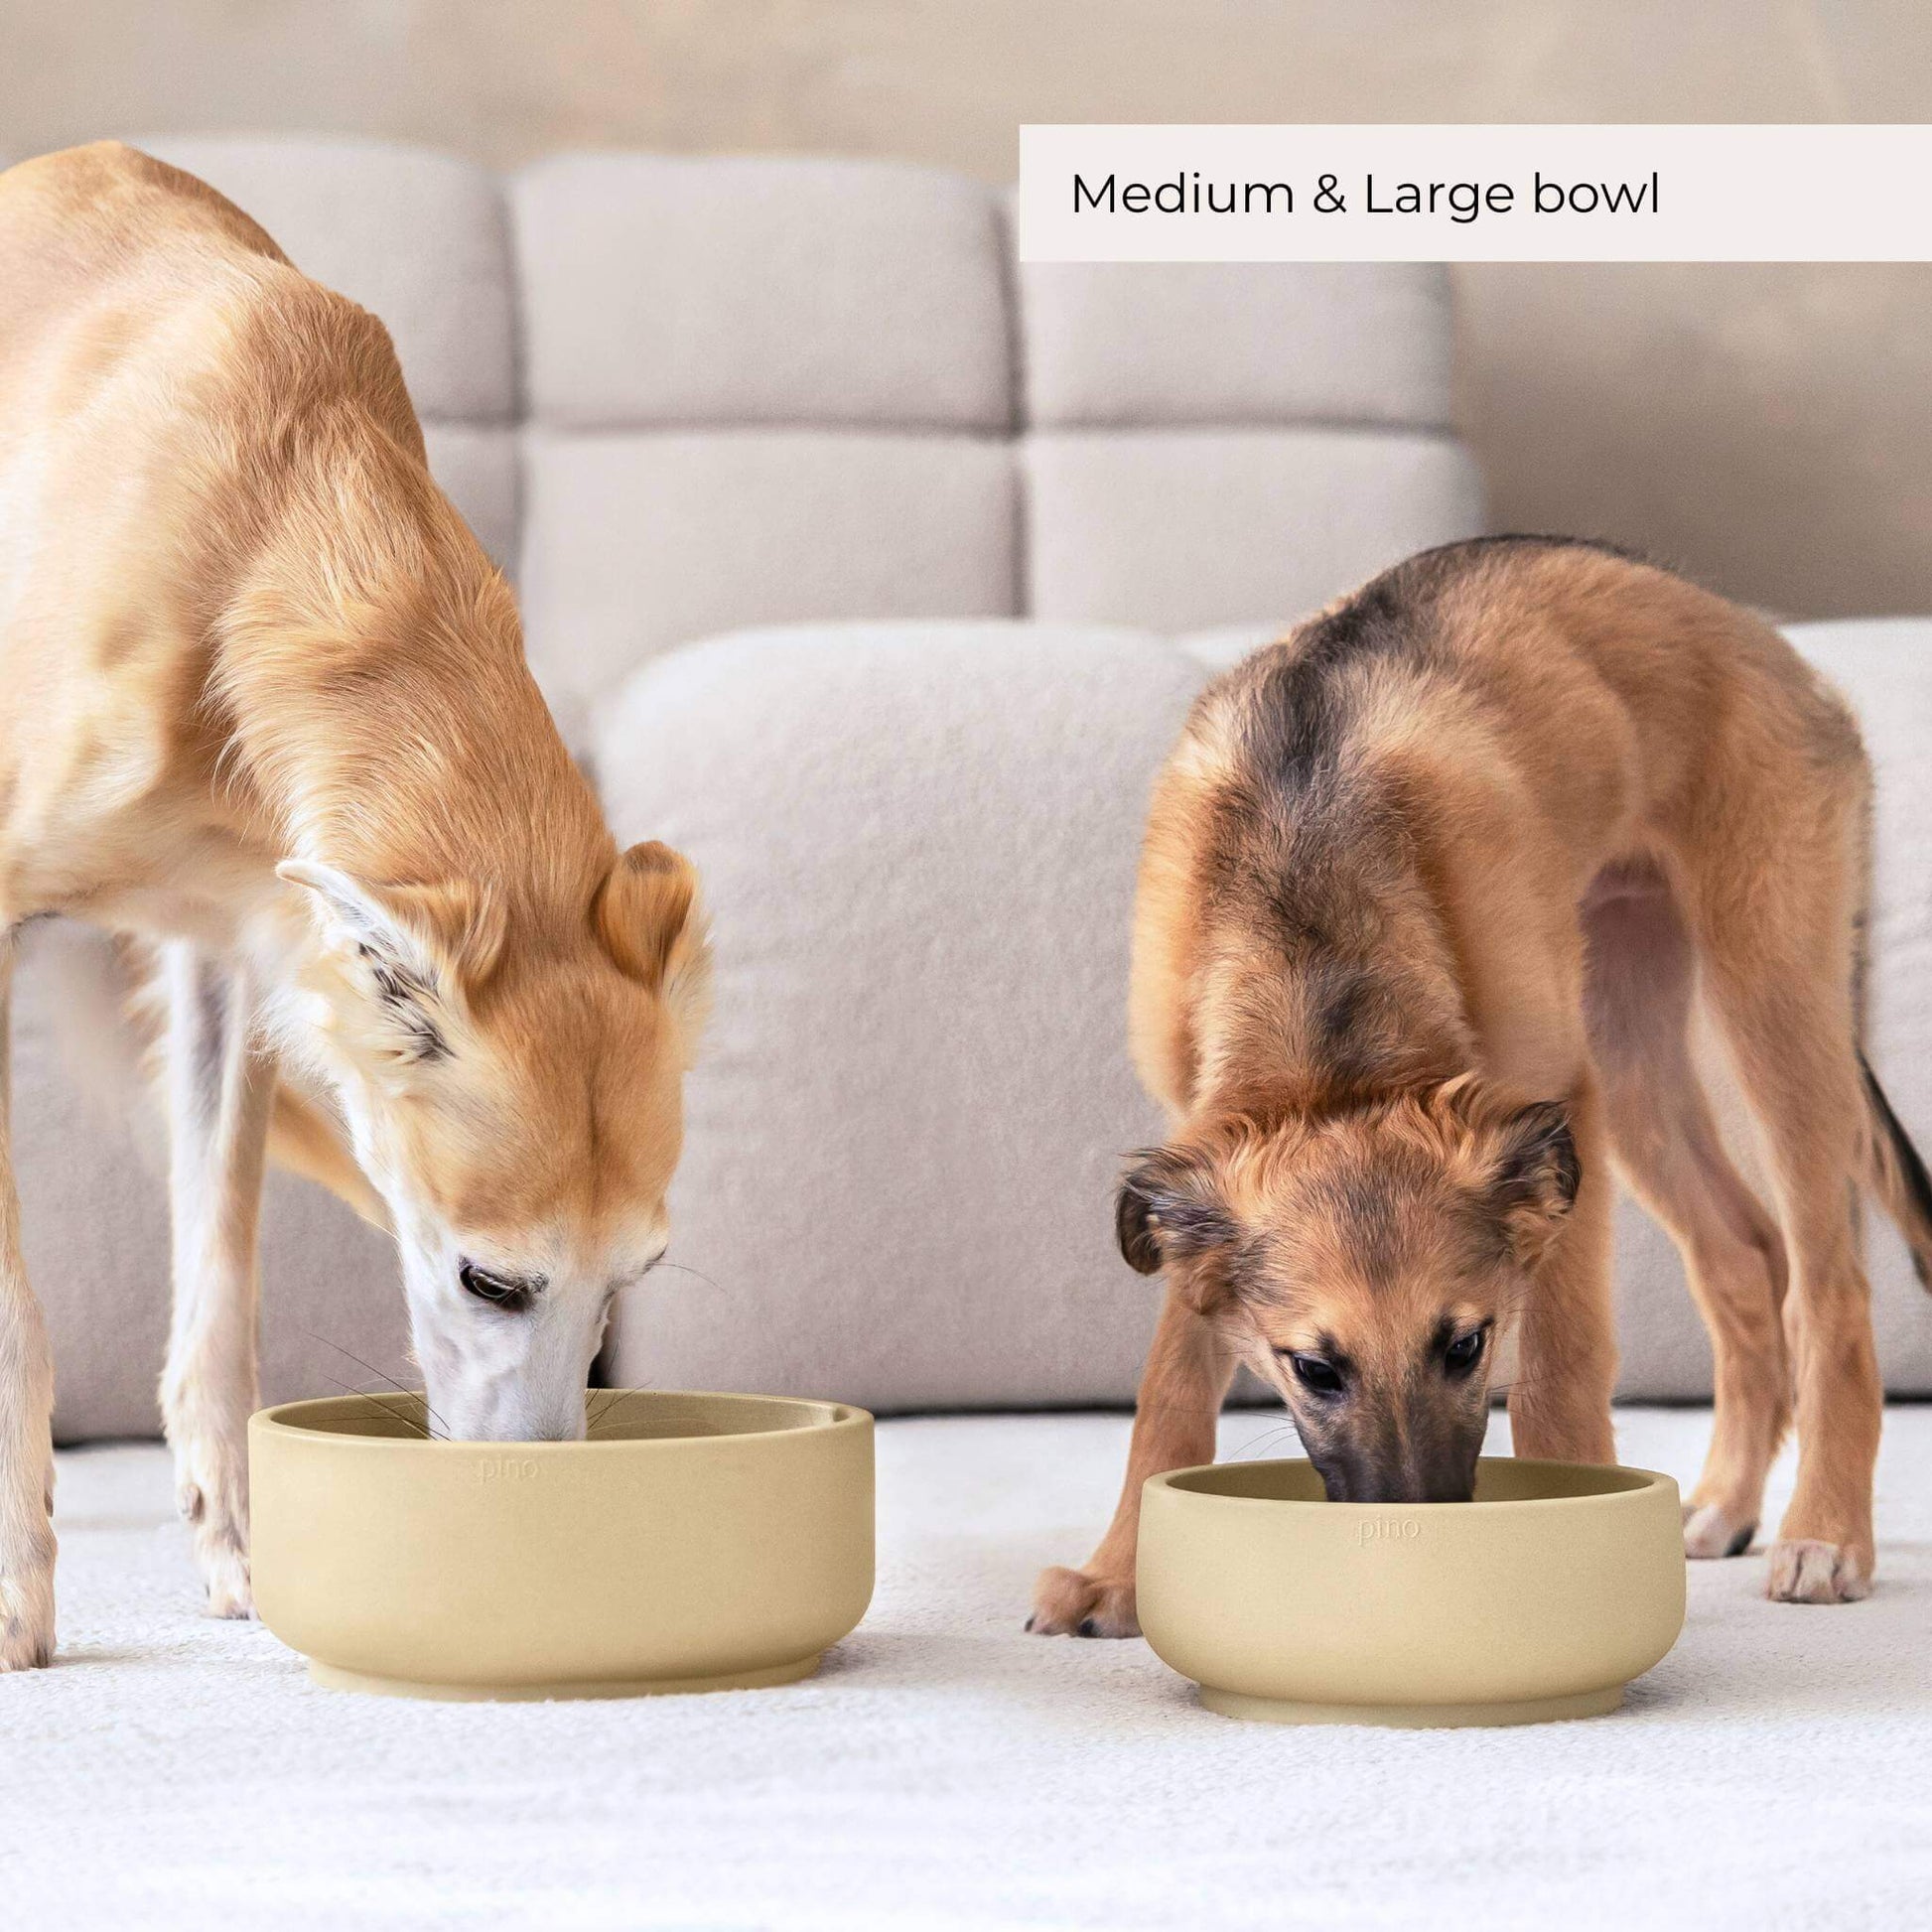 Two dogs eating out f two bowls. One medium bowl and one large bowl